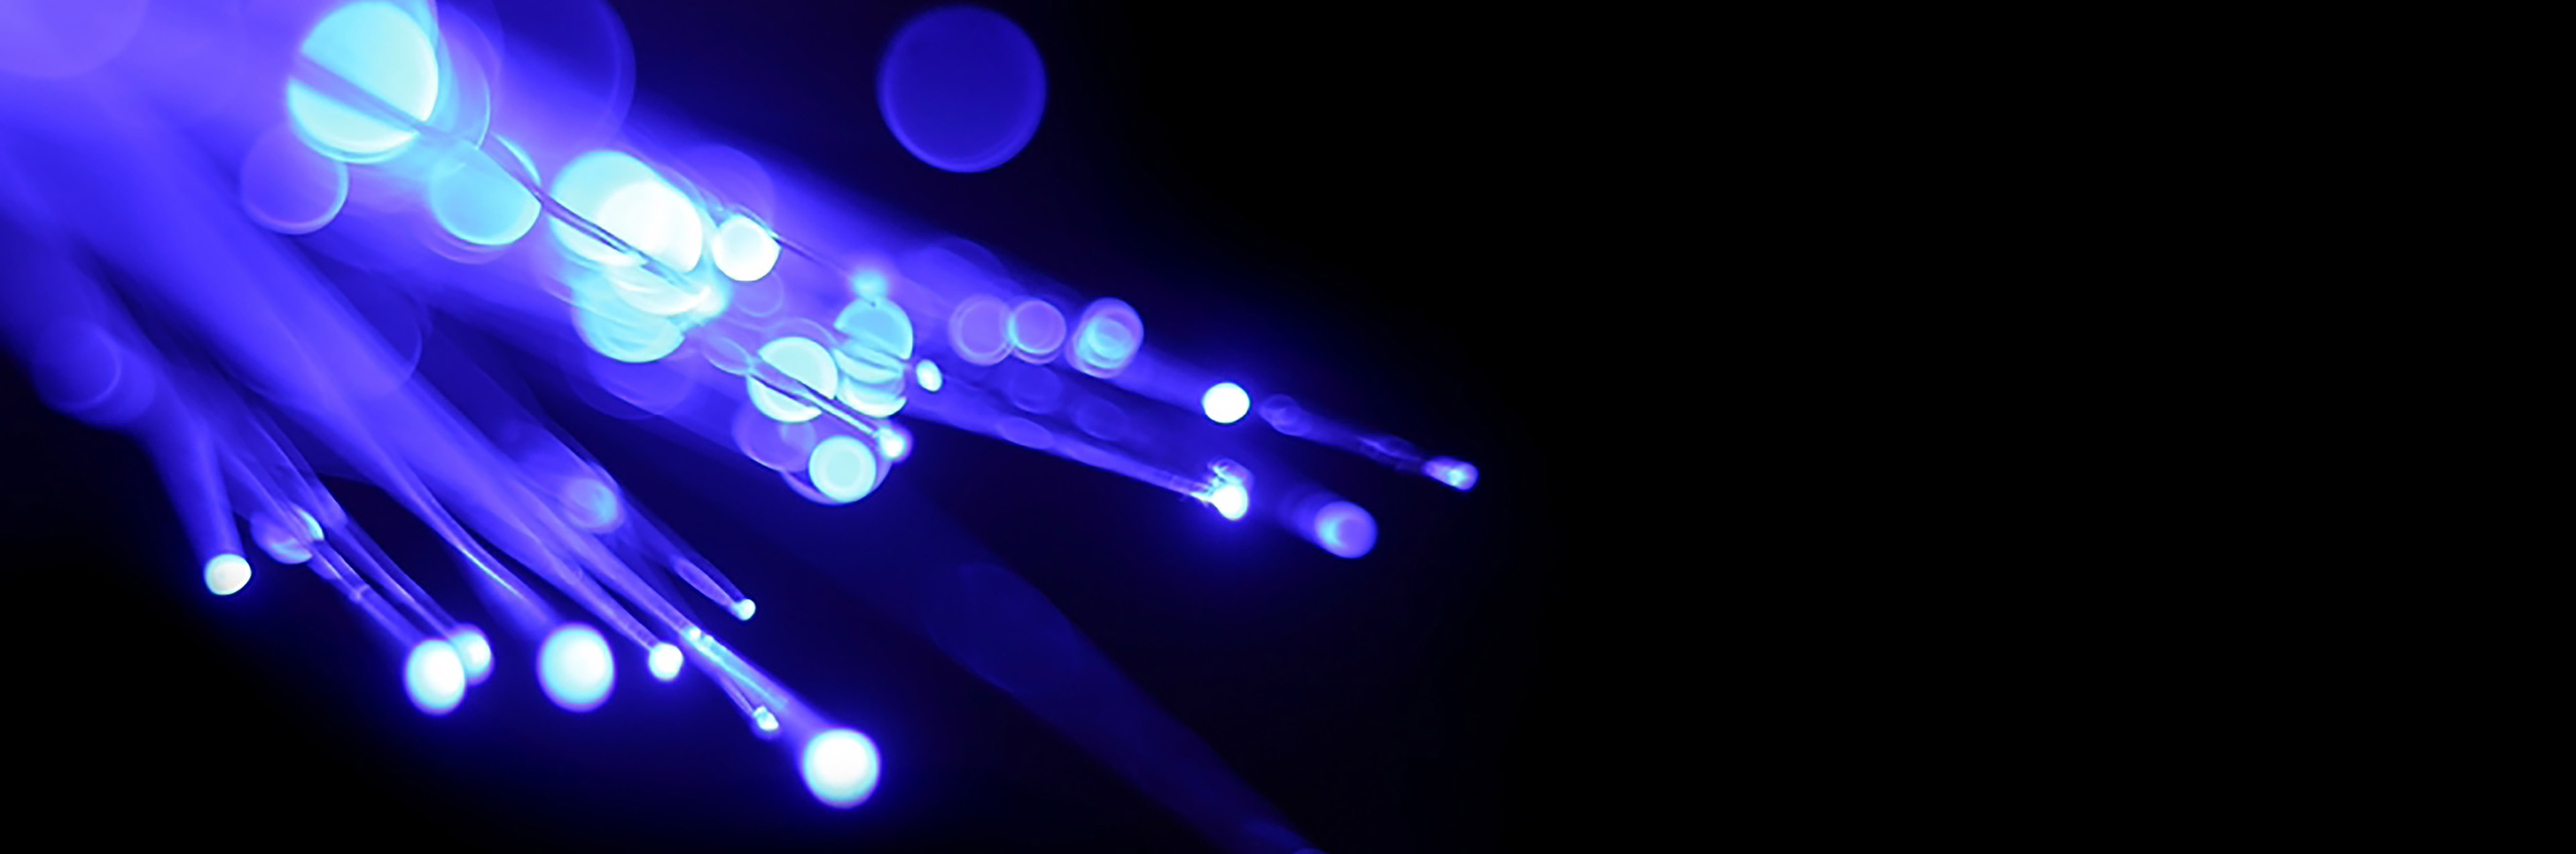 fiber optic cables glowing bright blue and white against a black background